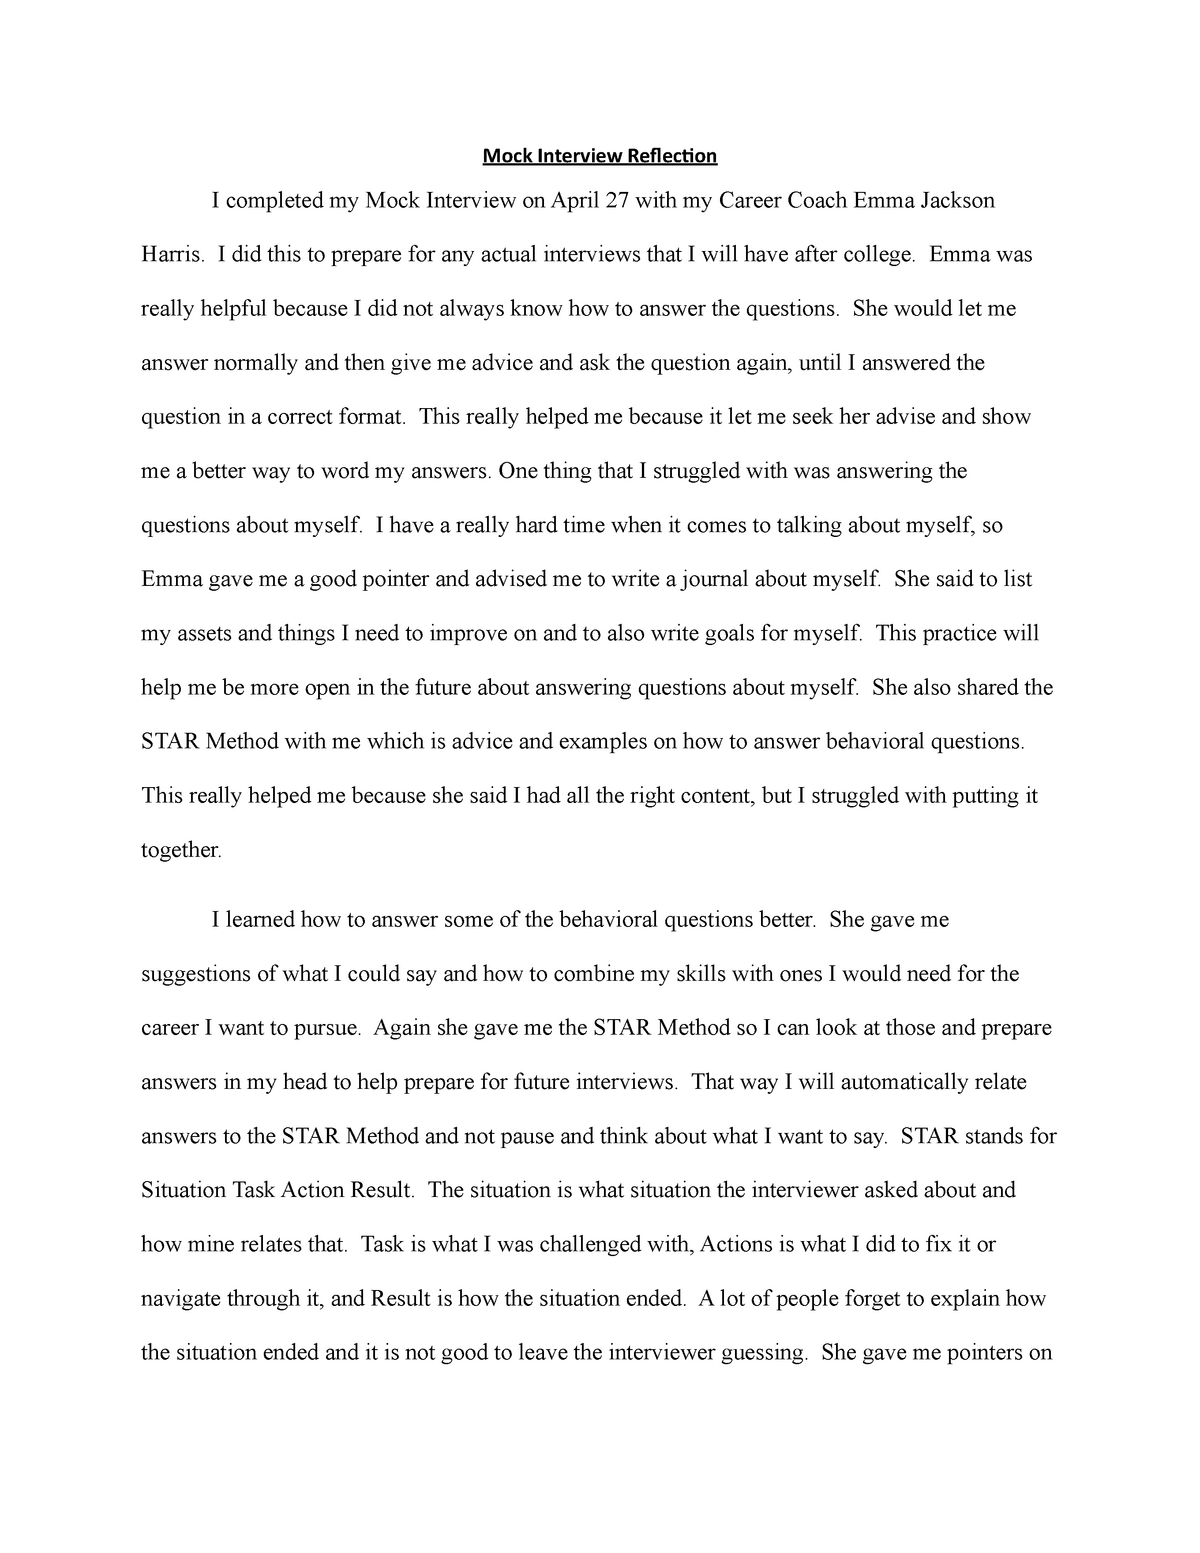 essay about mock job interview